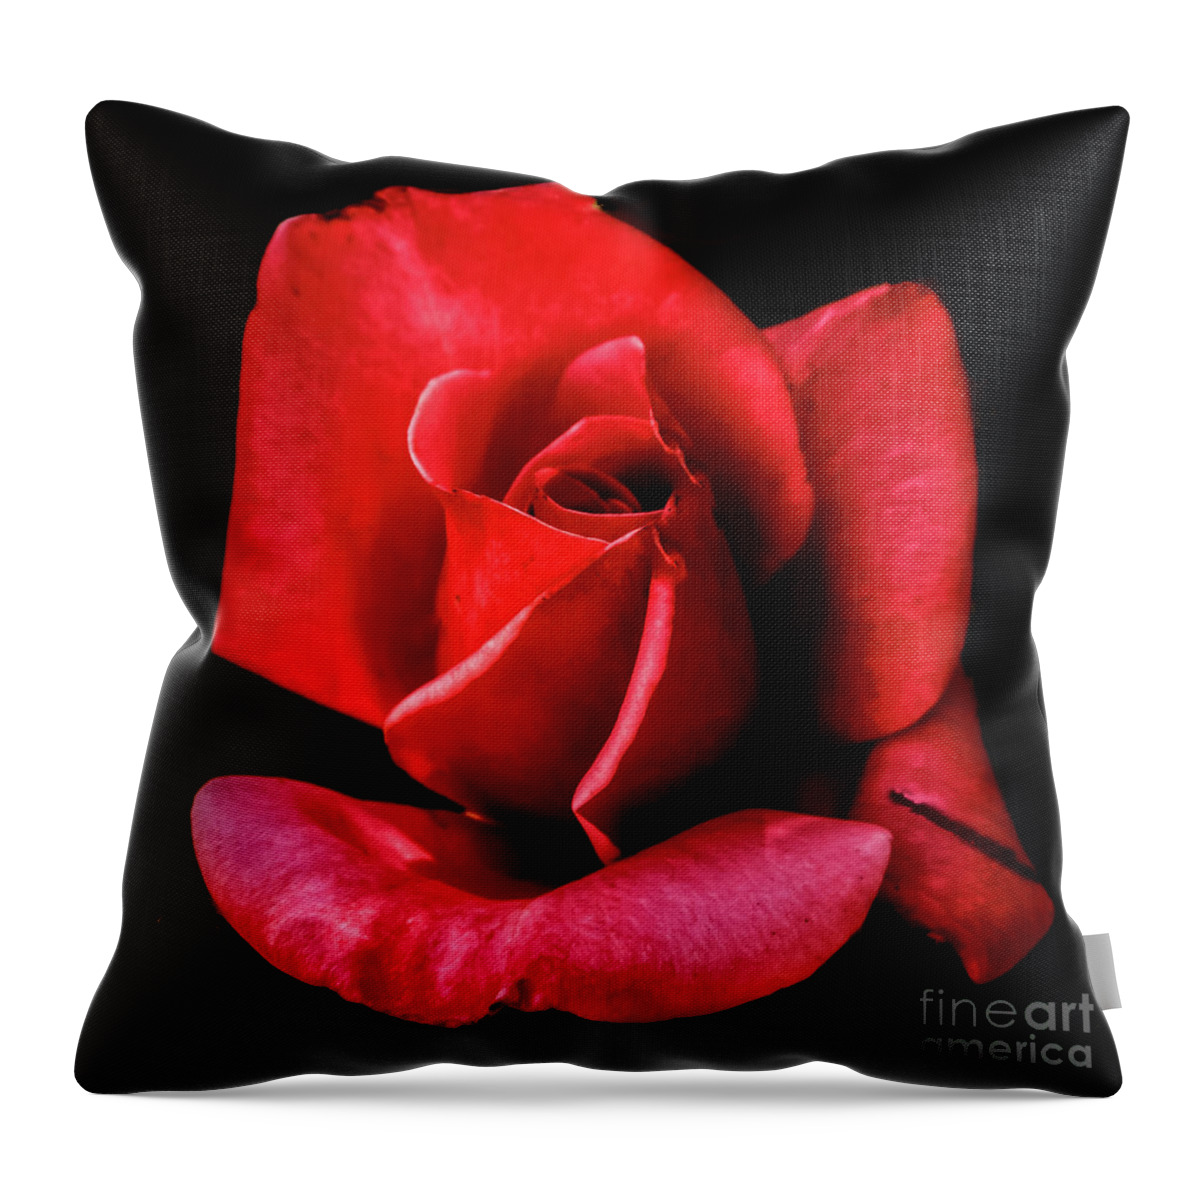 Arizona Throw Pillow featuring the photograph This Bud Is For You by Robert Bales